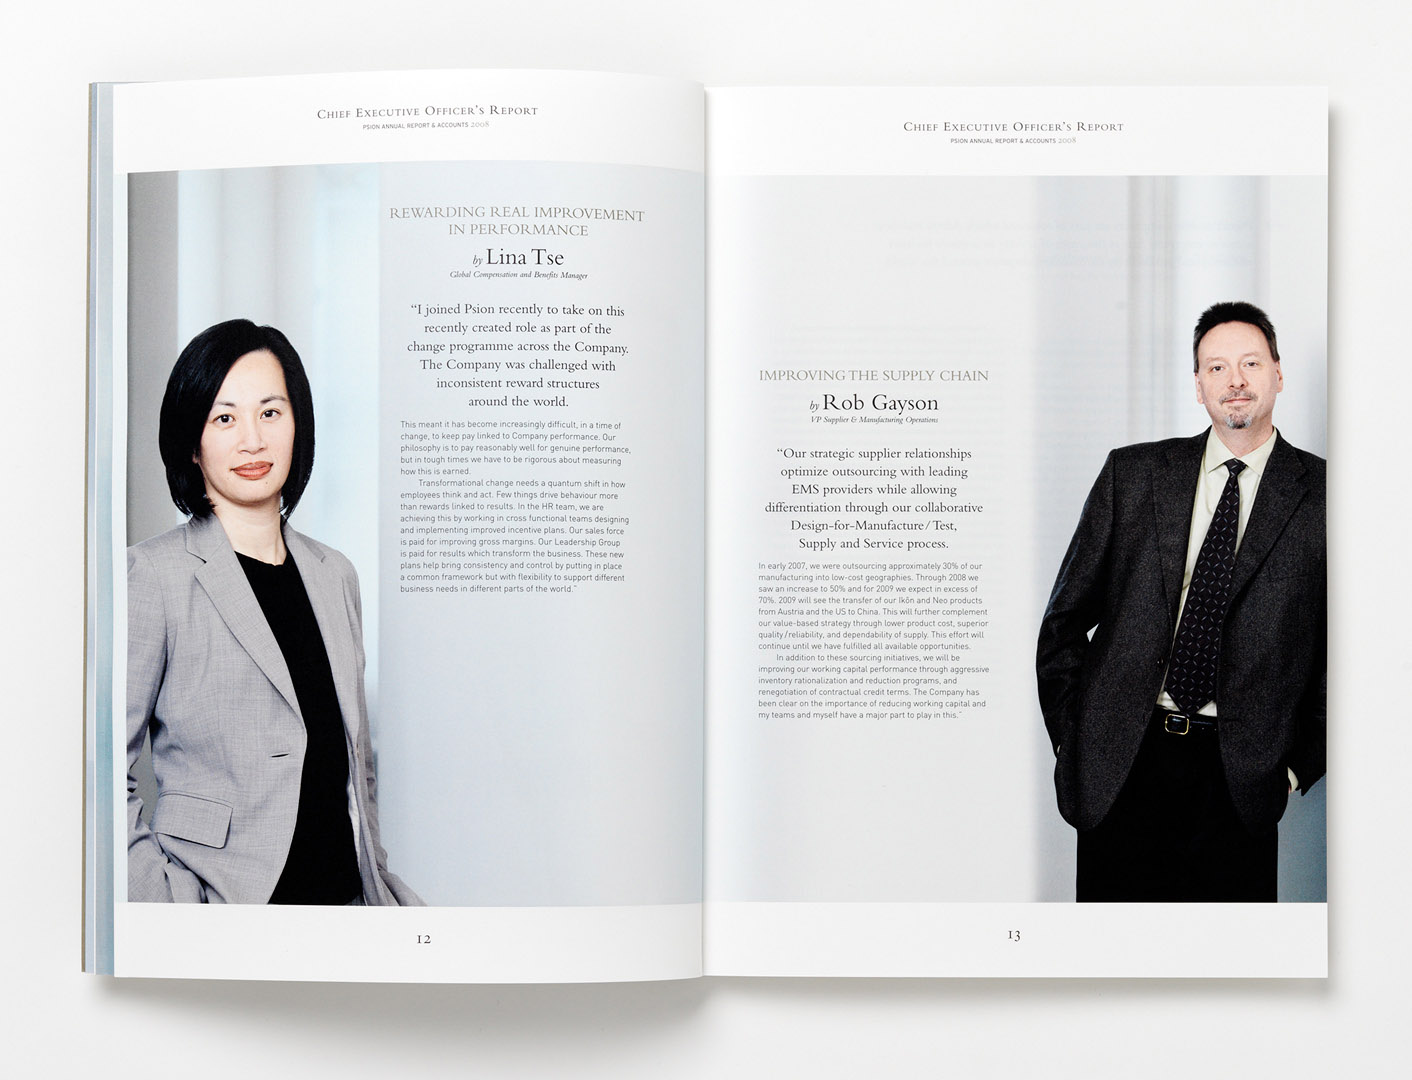 Annual Report spread featuring two 3/4 length portraits